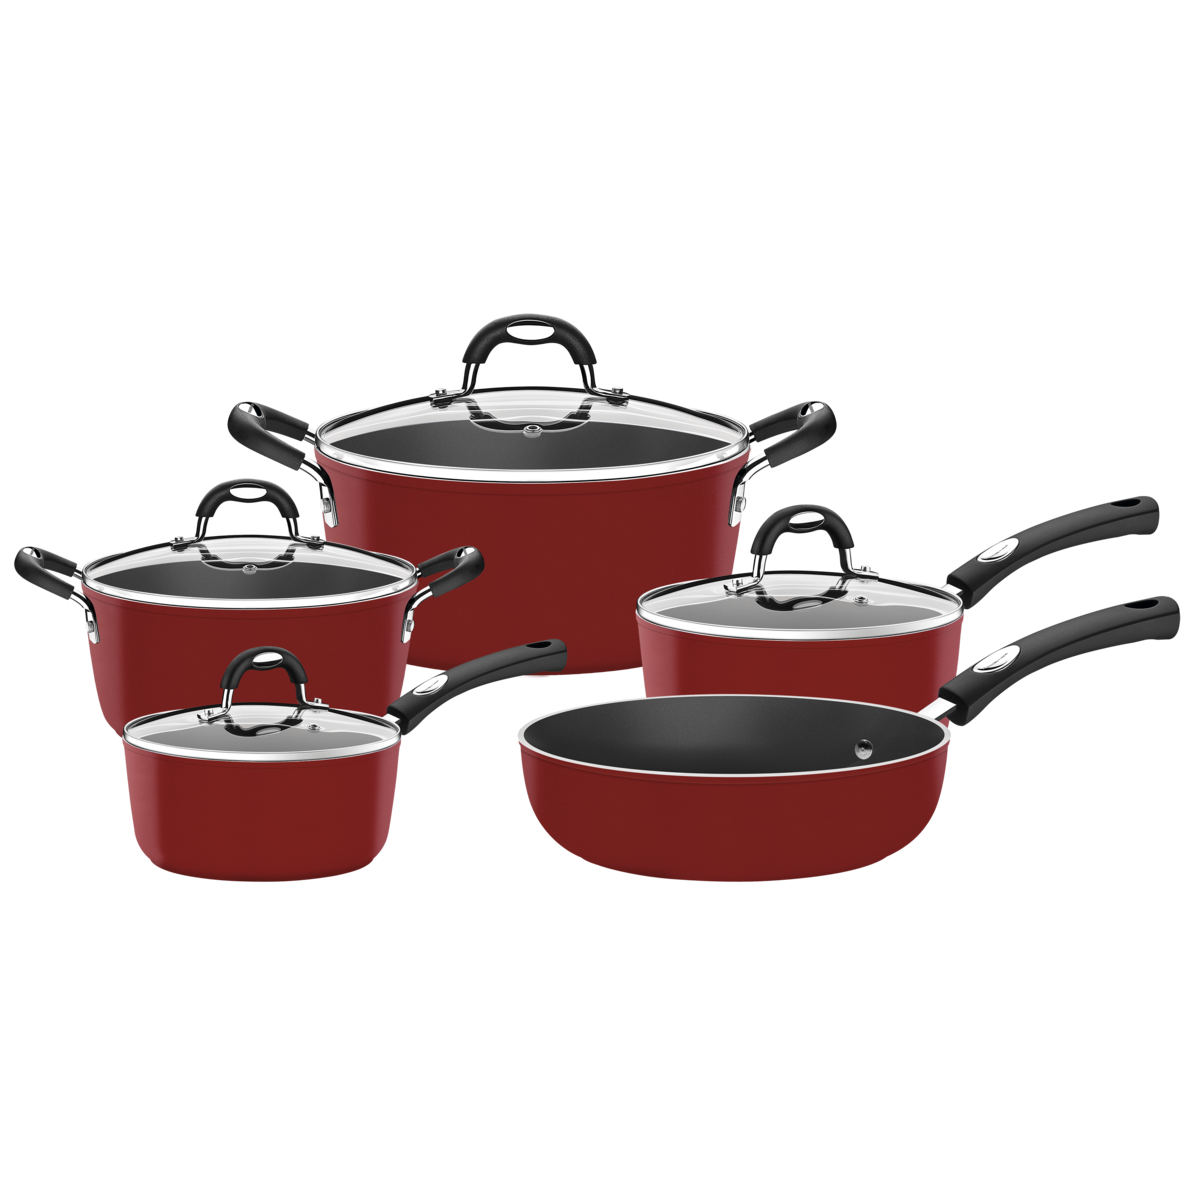 Tramontina 80142/028DS LYON Cold-Forged Induction-Ready Aluminum with Ceramic-Reinforced Nonstick Covered Braiser Garnet 5-Quart Made in Brazil 